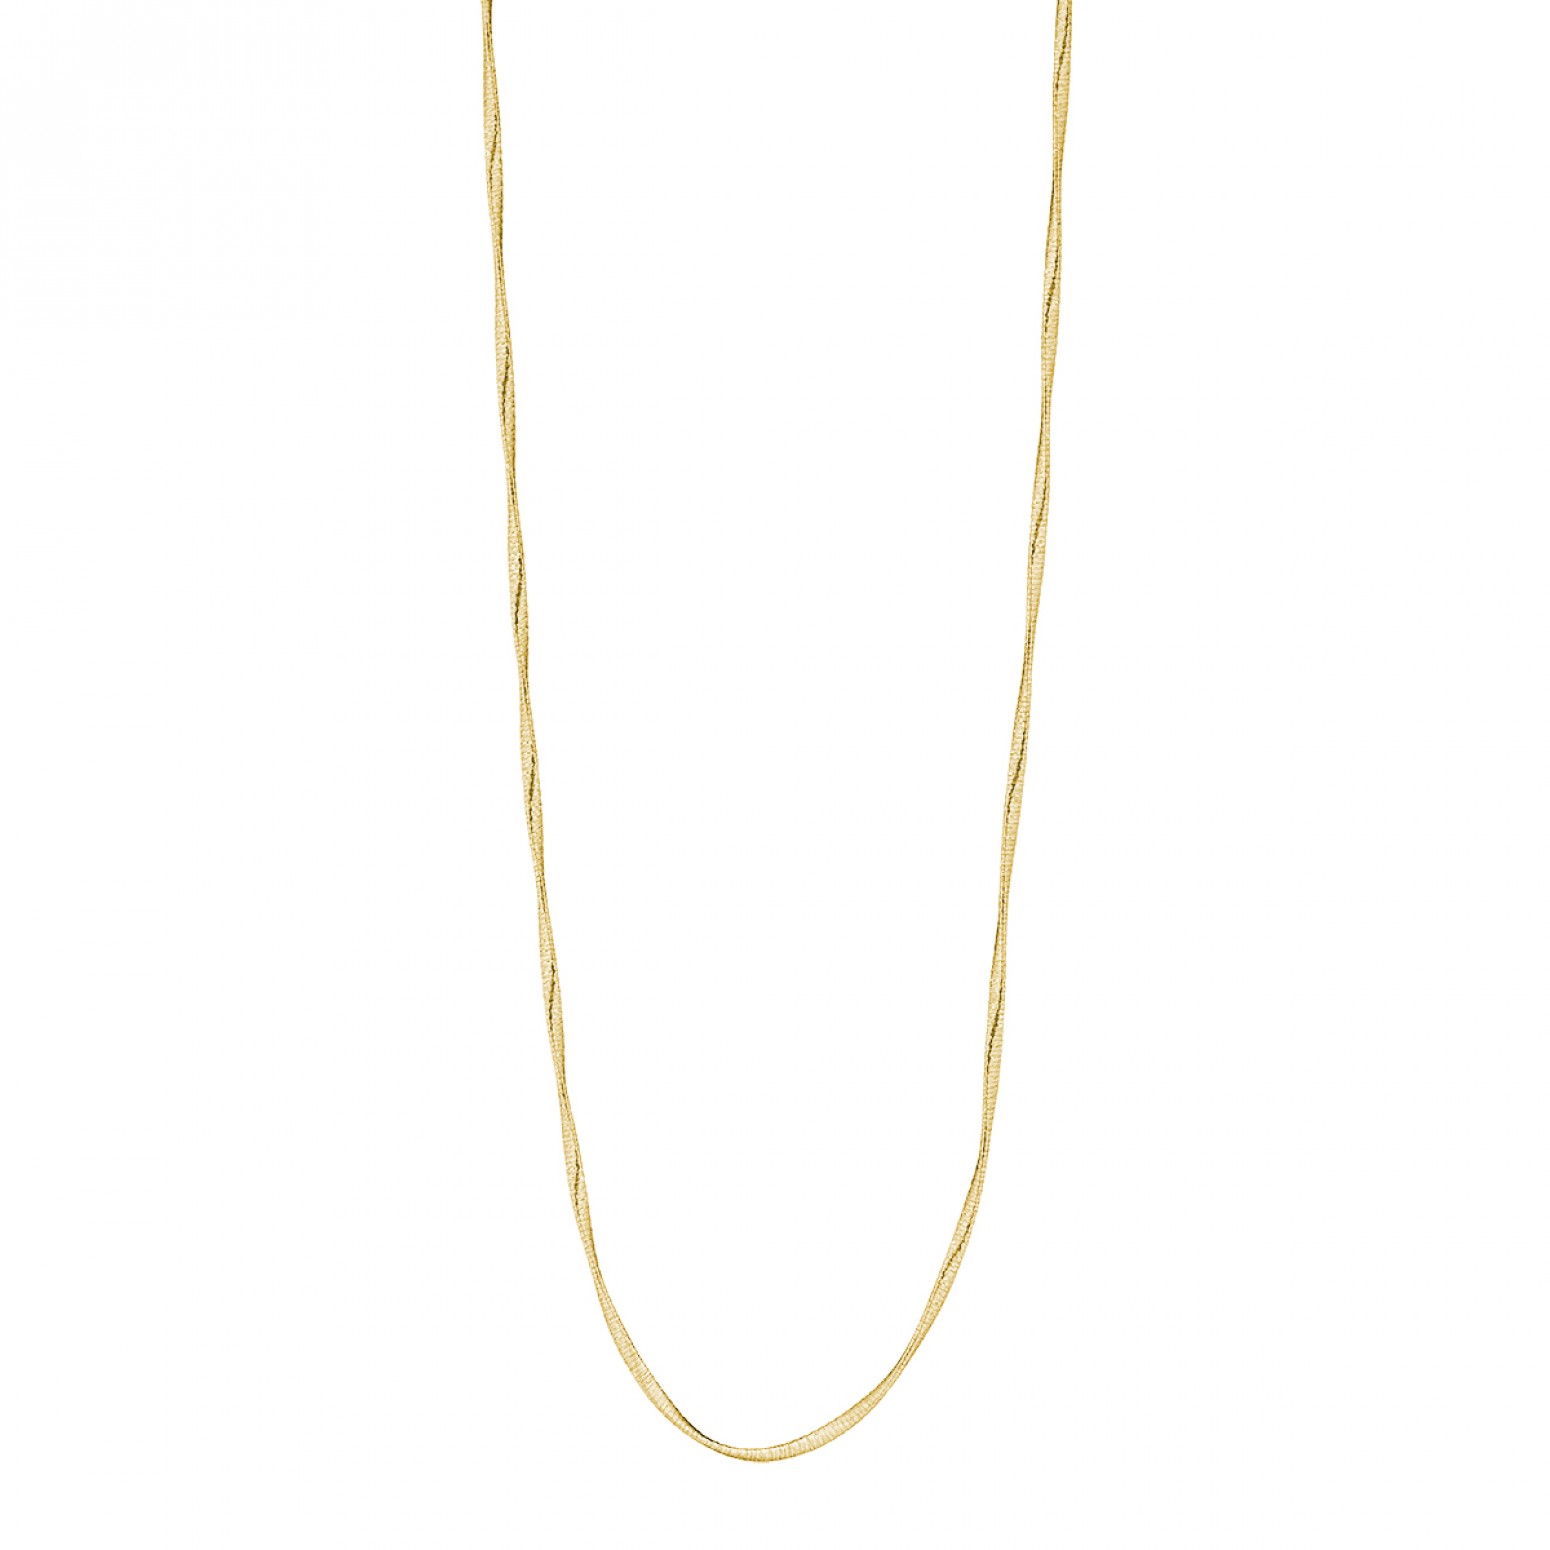 Marcello Pane necklace with gold plated silver, CLCC 009, ko6099 NECKLACES Κοσμηματα - chrilia.gr